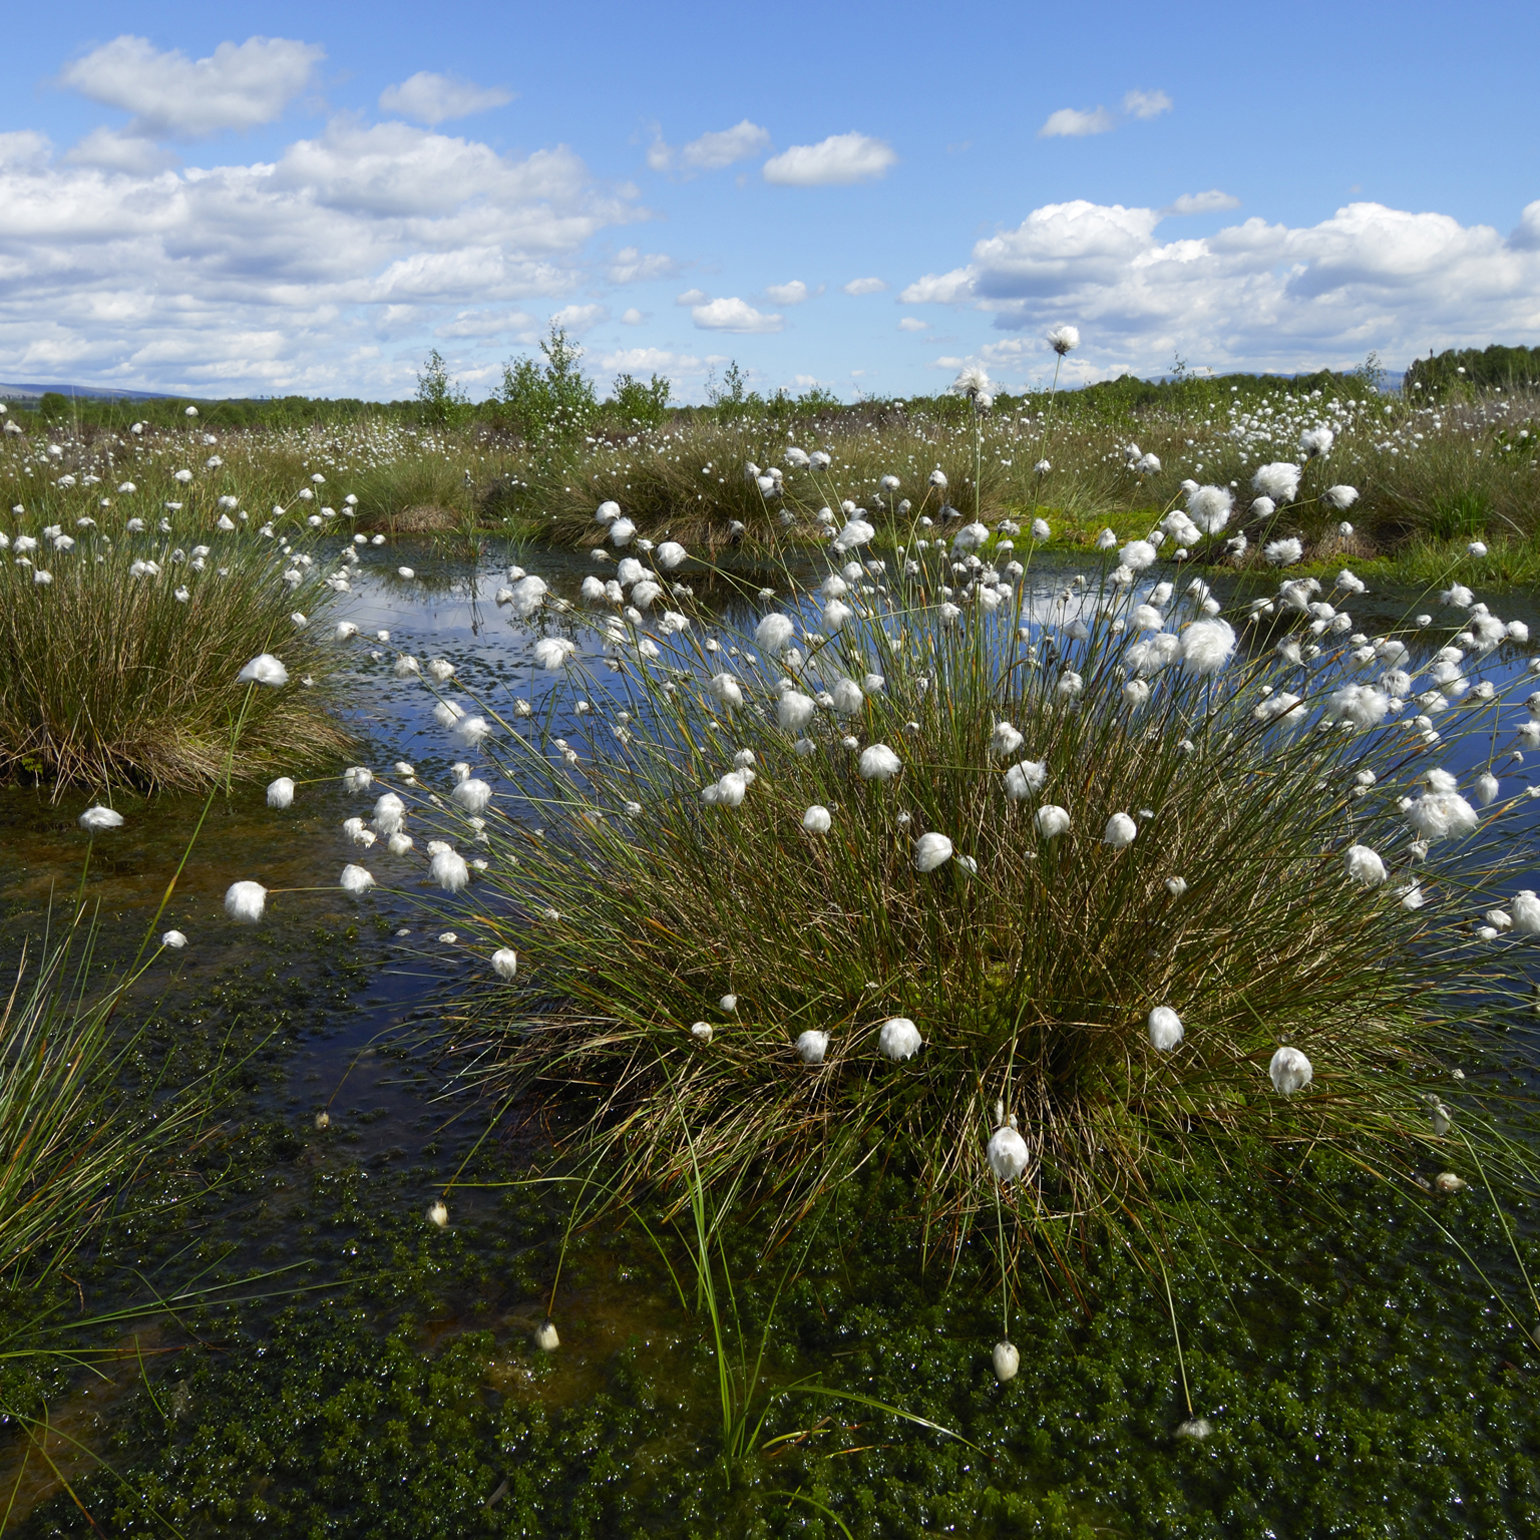 Cotton plants growing in a watery bog area